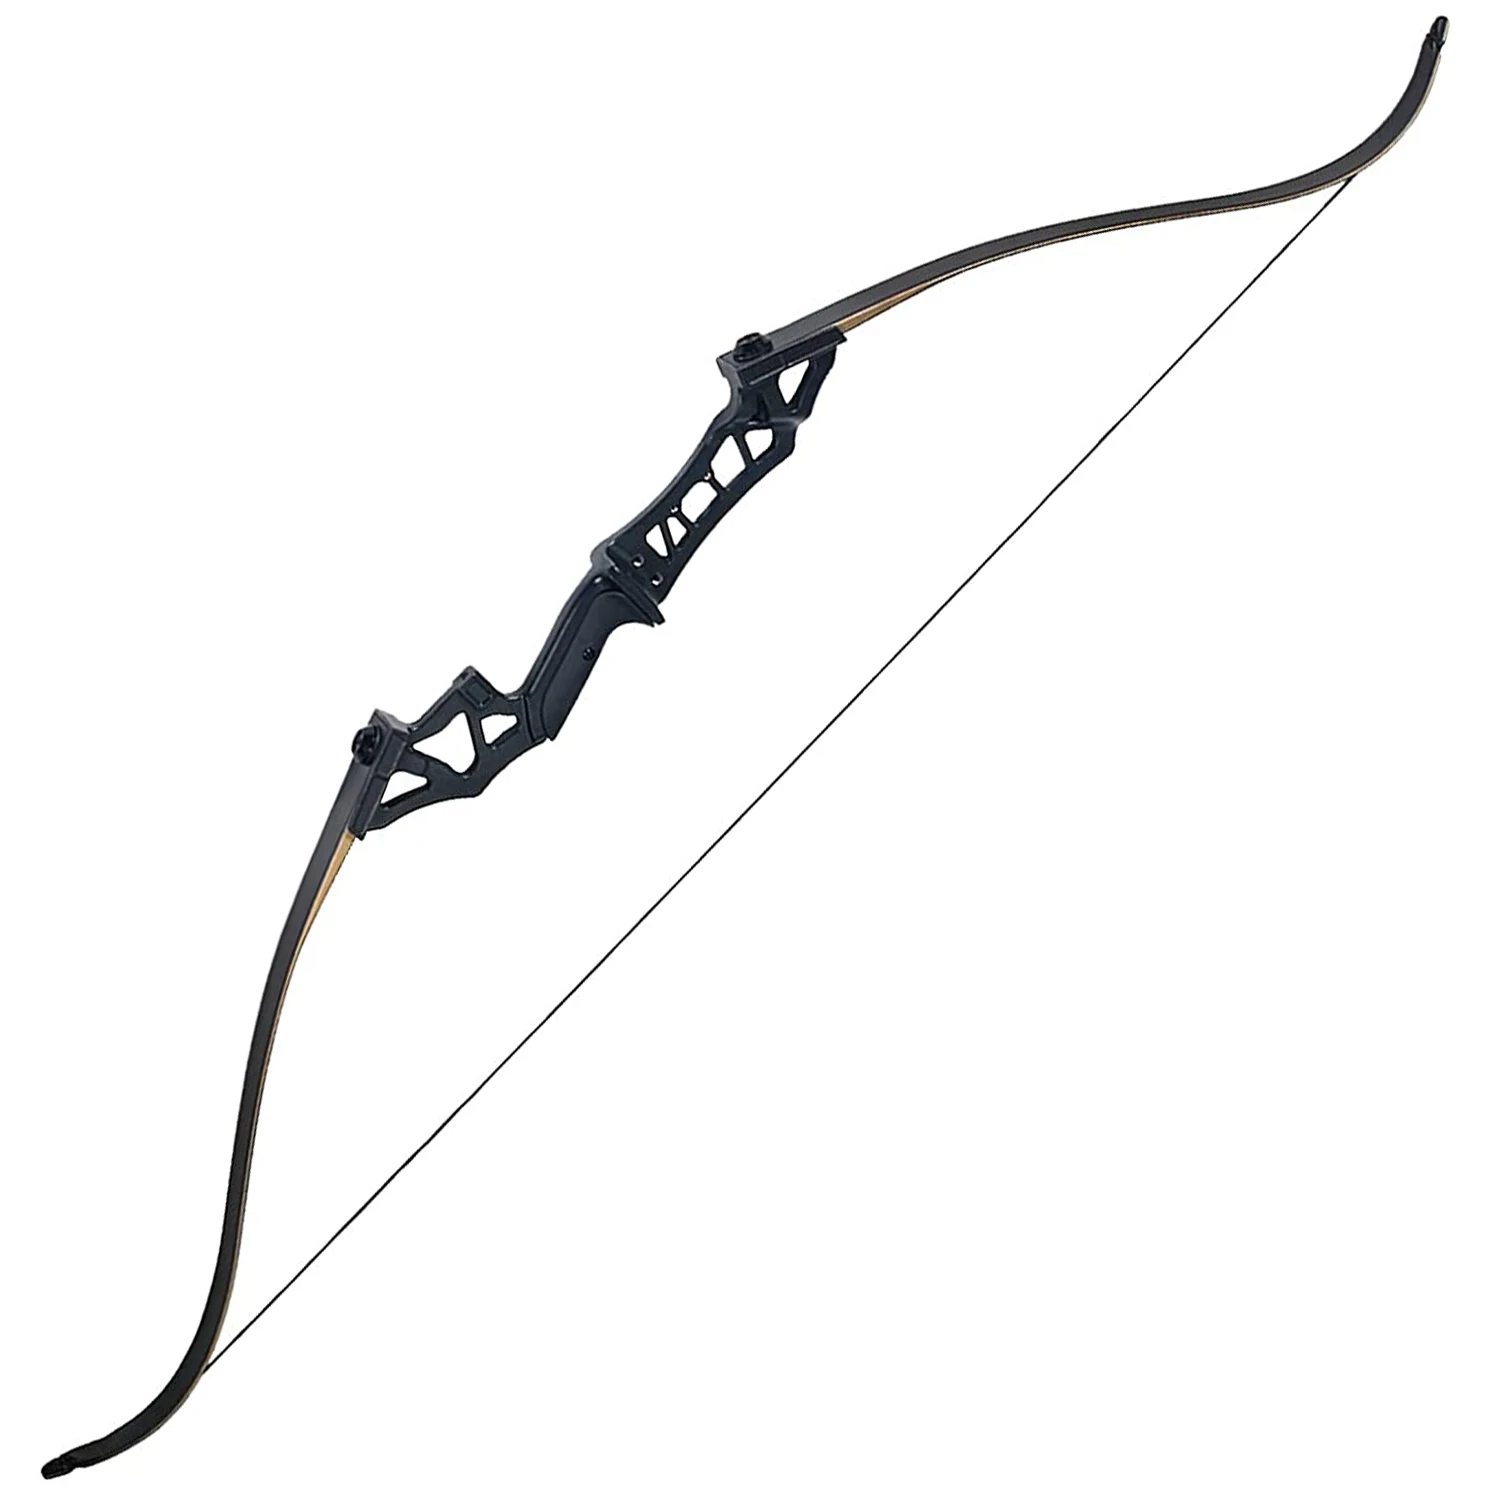 Onebows 60inch Metal Riser Recurve Bow for Hunting Competition Shooting 30-70Lbs Black/Camo Adult Takedown Long Bow Archery